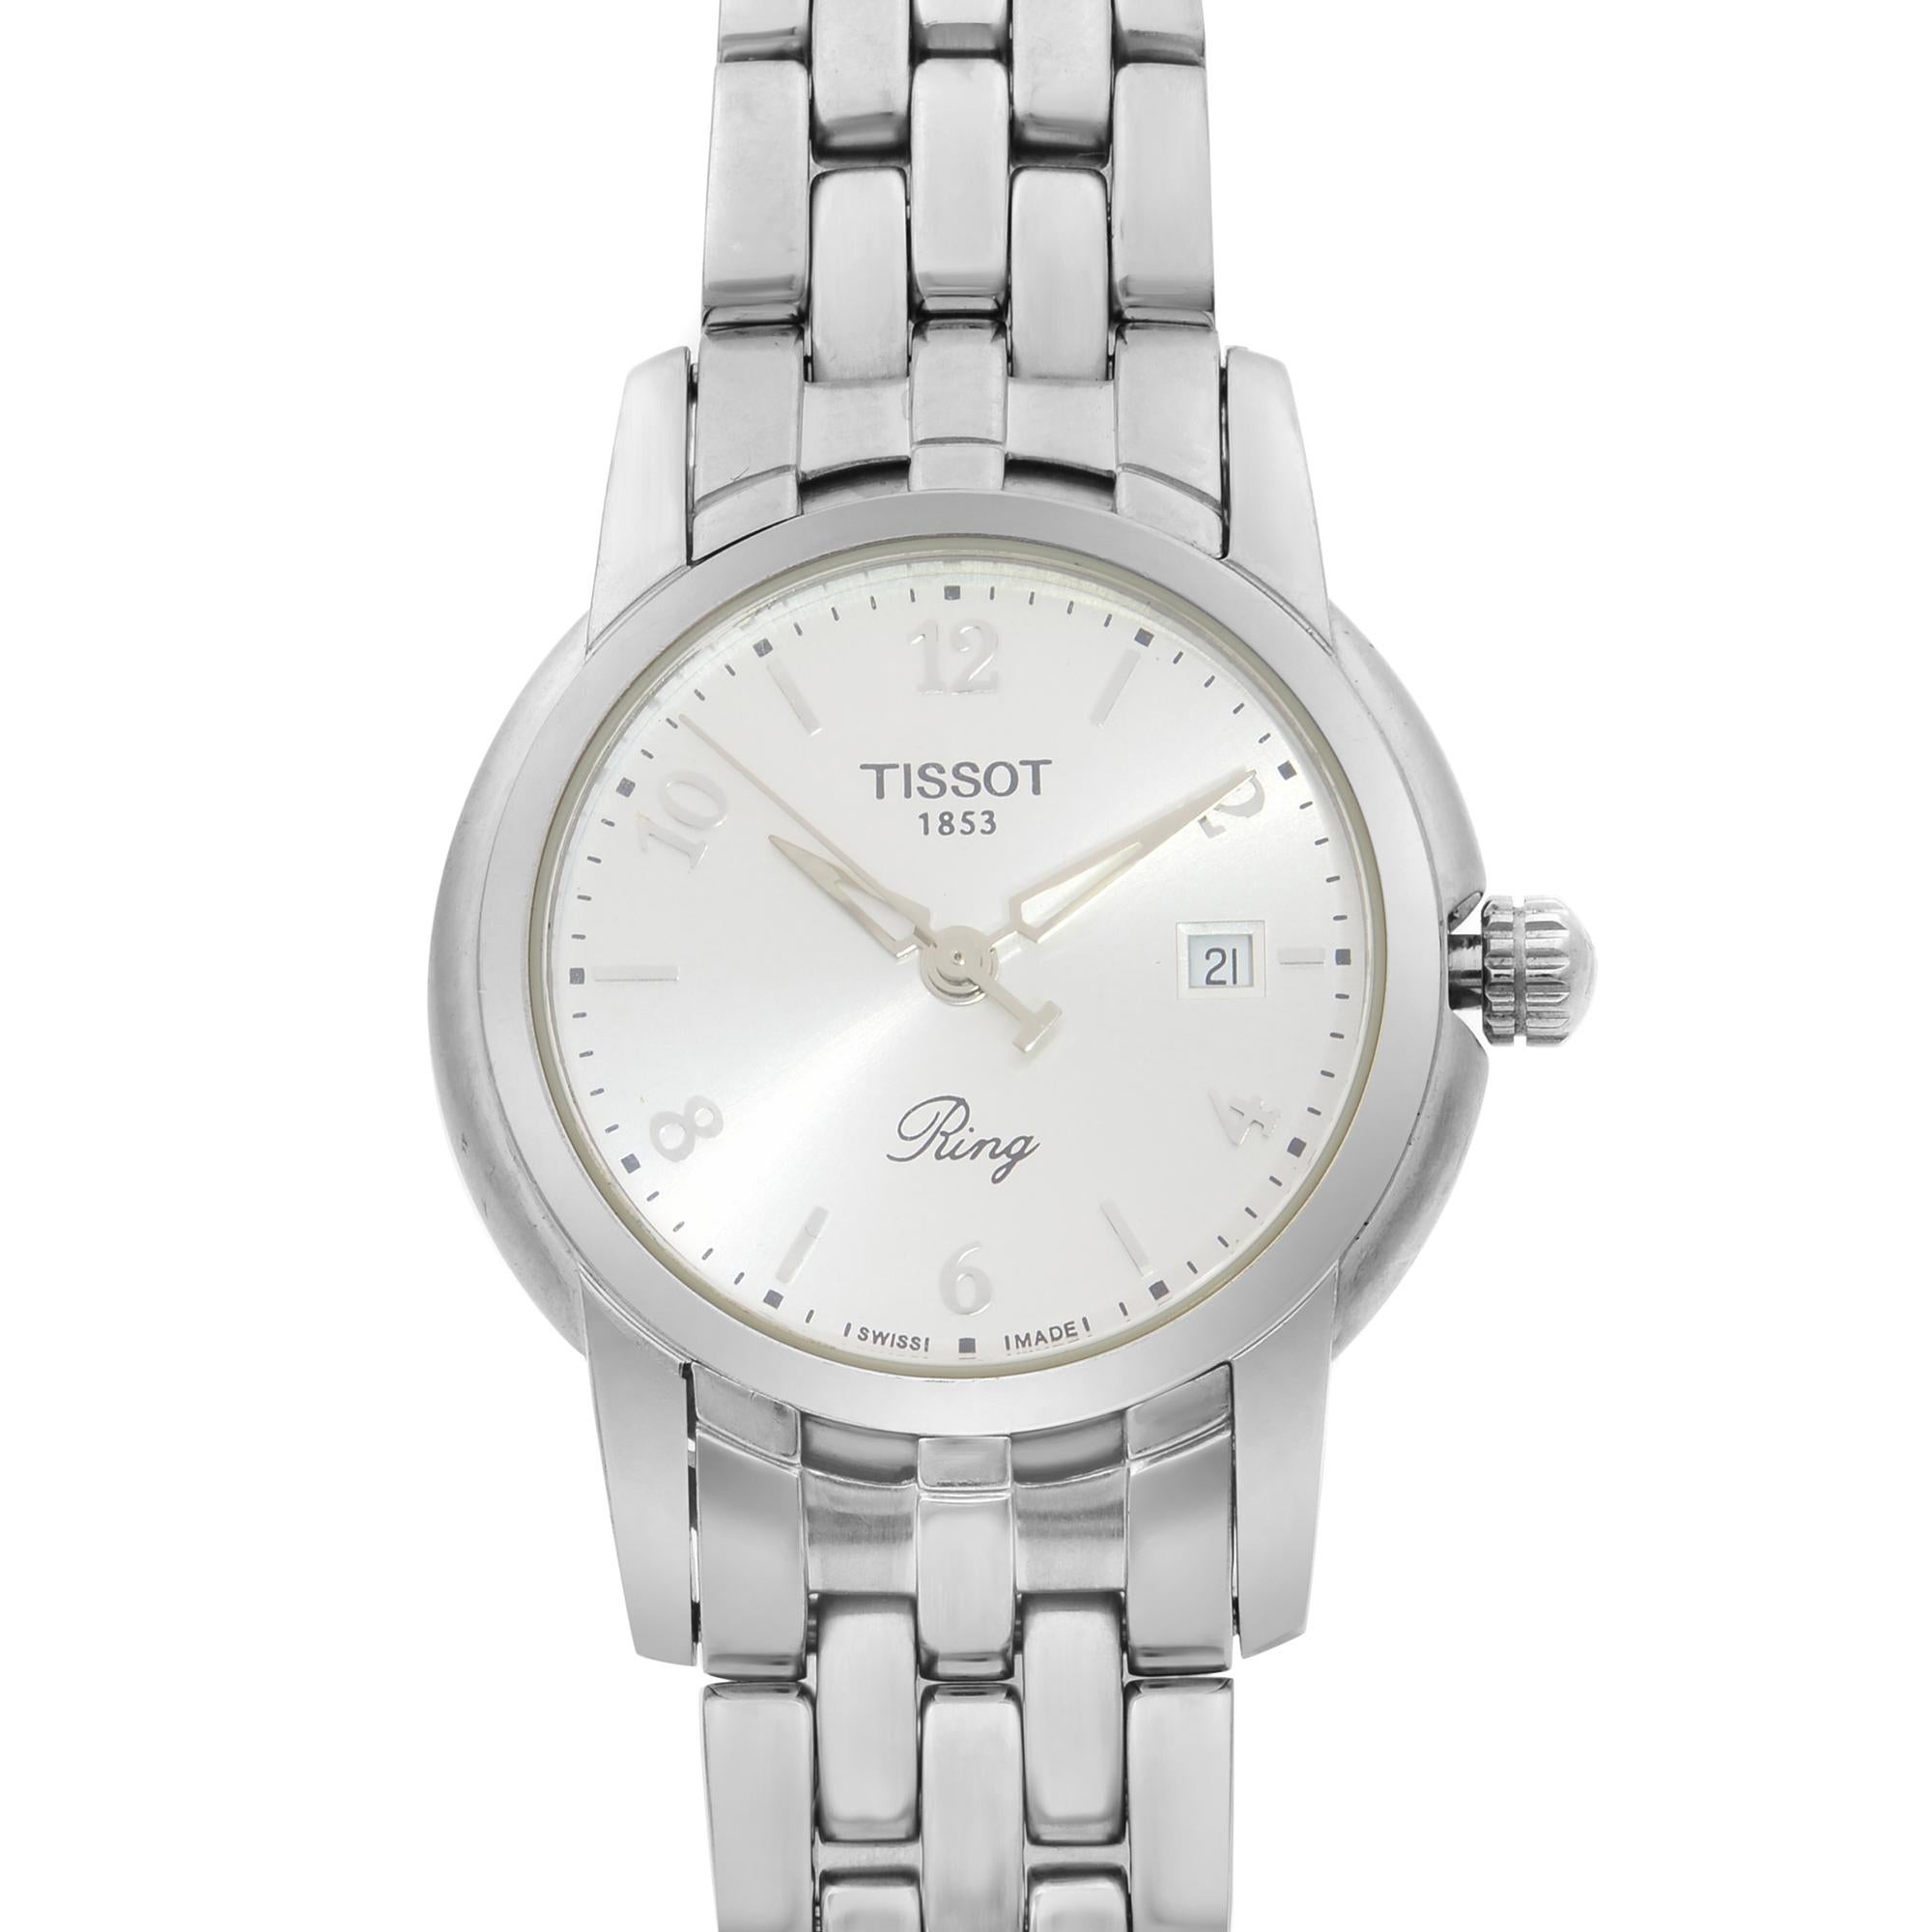 This pre-owned Tissot T-Classic T97.1.181.32 is a beautiful Ladie's timepiece that is powered by quartz (battery) movement which is cased in a stainless steel case. It has a round shape face, date indicator dial and has hand arabic numerals, sticks